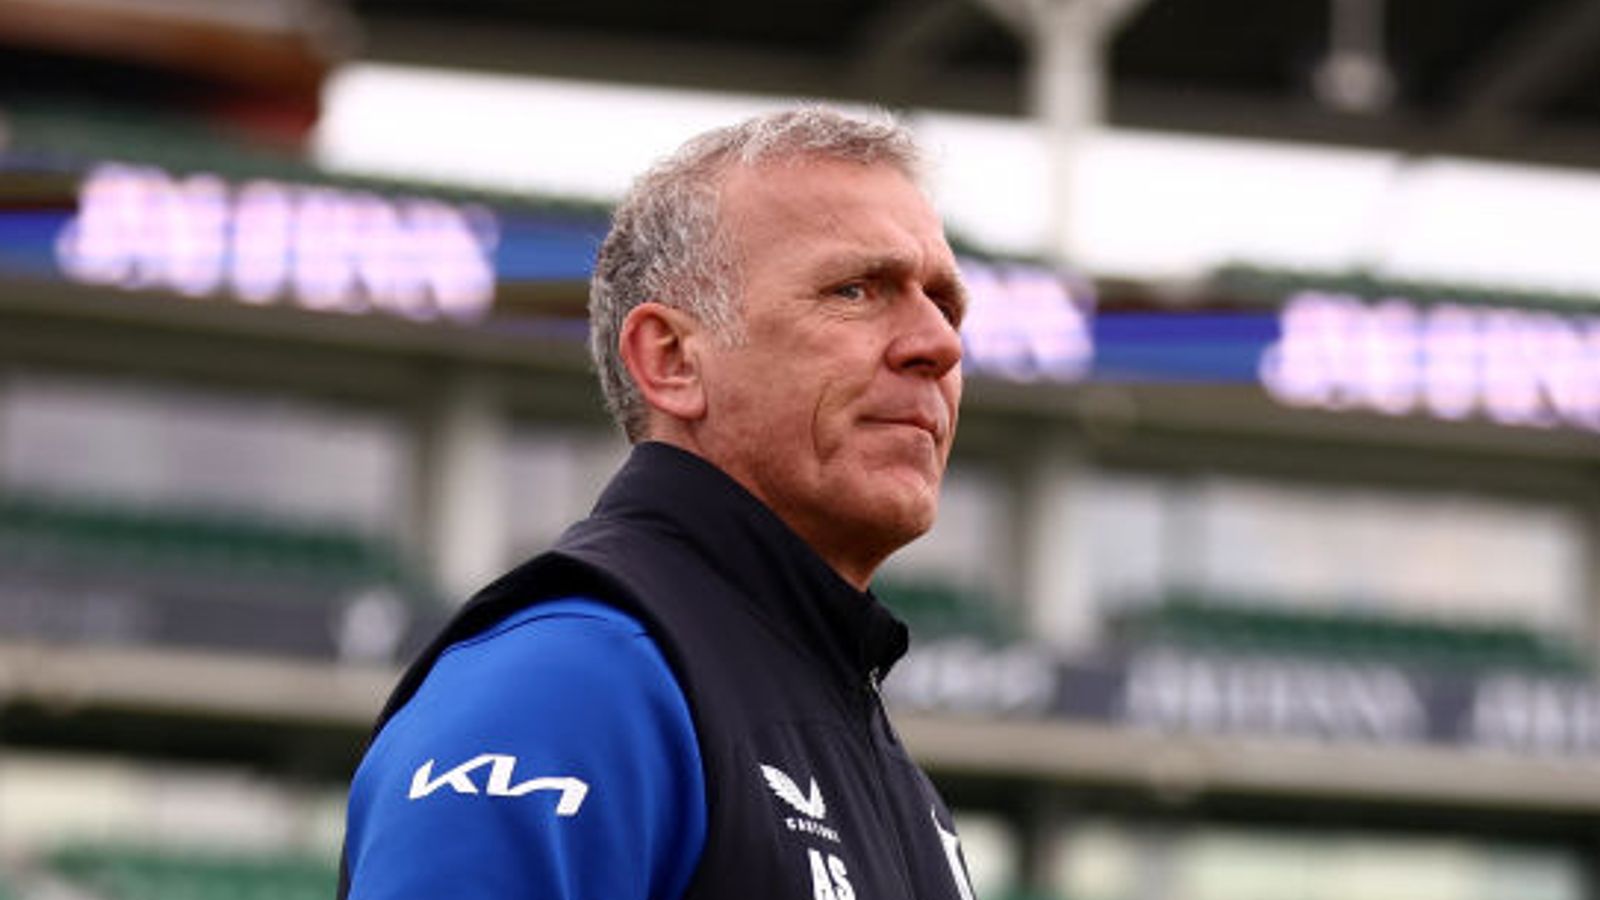 Alec Stewart: Ex-England captain opens up about his decision to step down as Surrey’s director